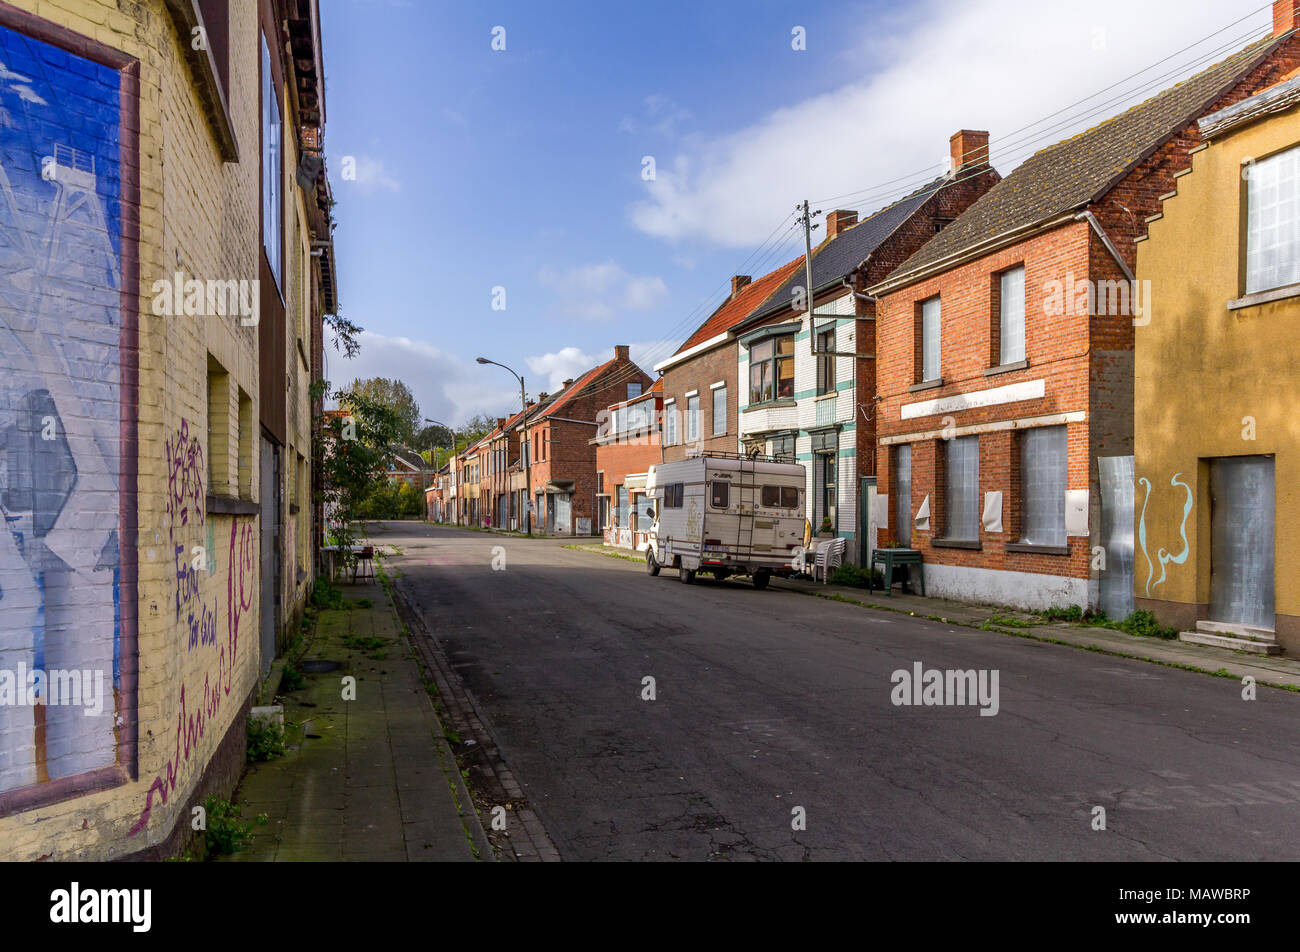 A completely uninhabited street in the town of Doel, Belgium Stock Photo